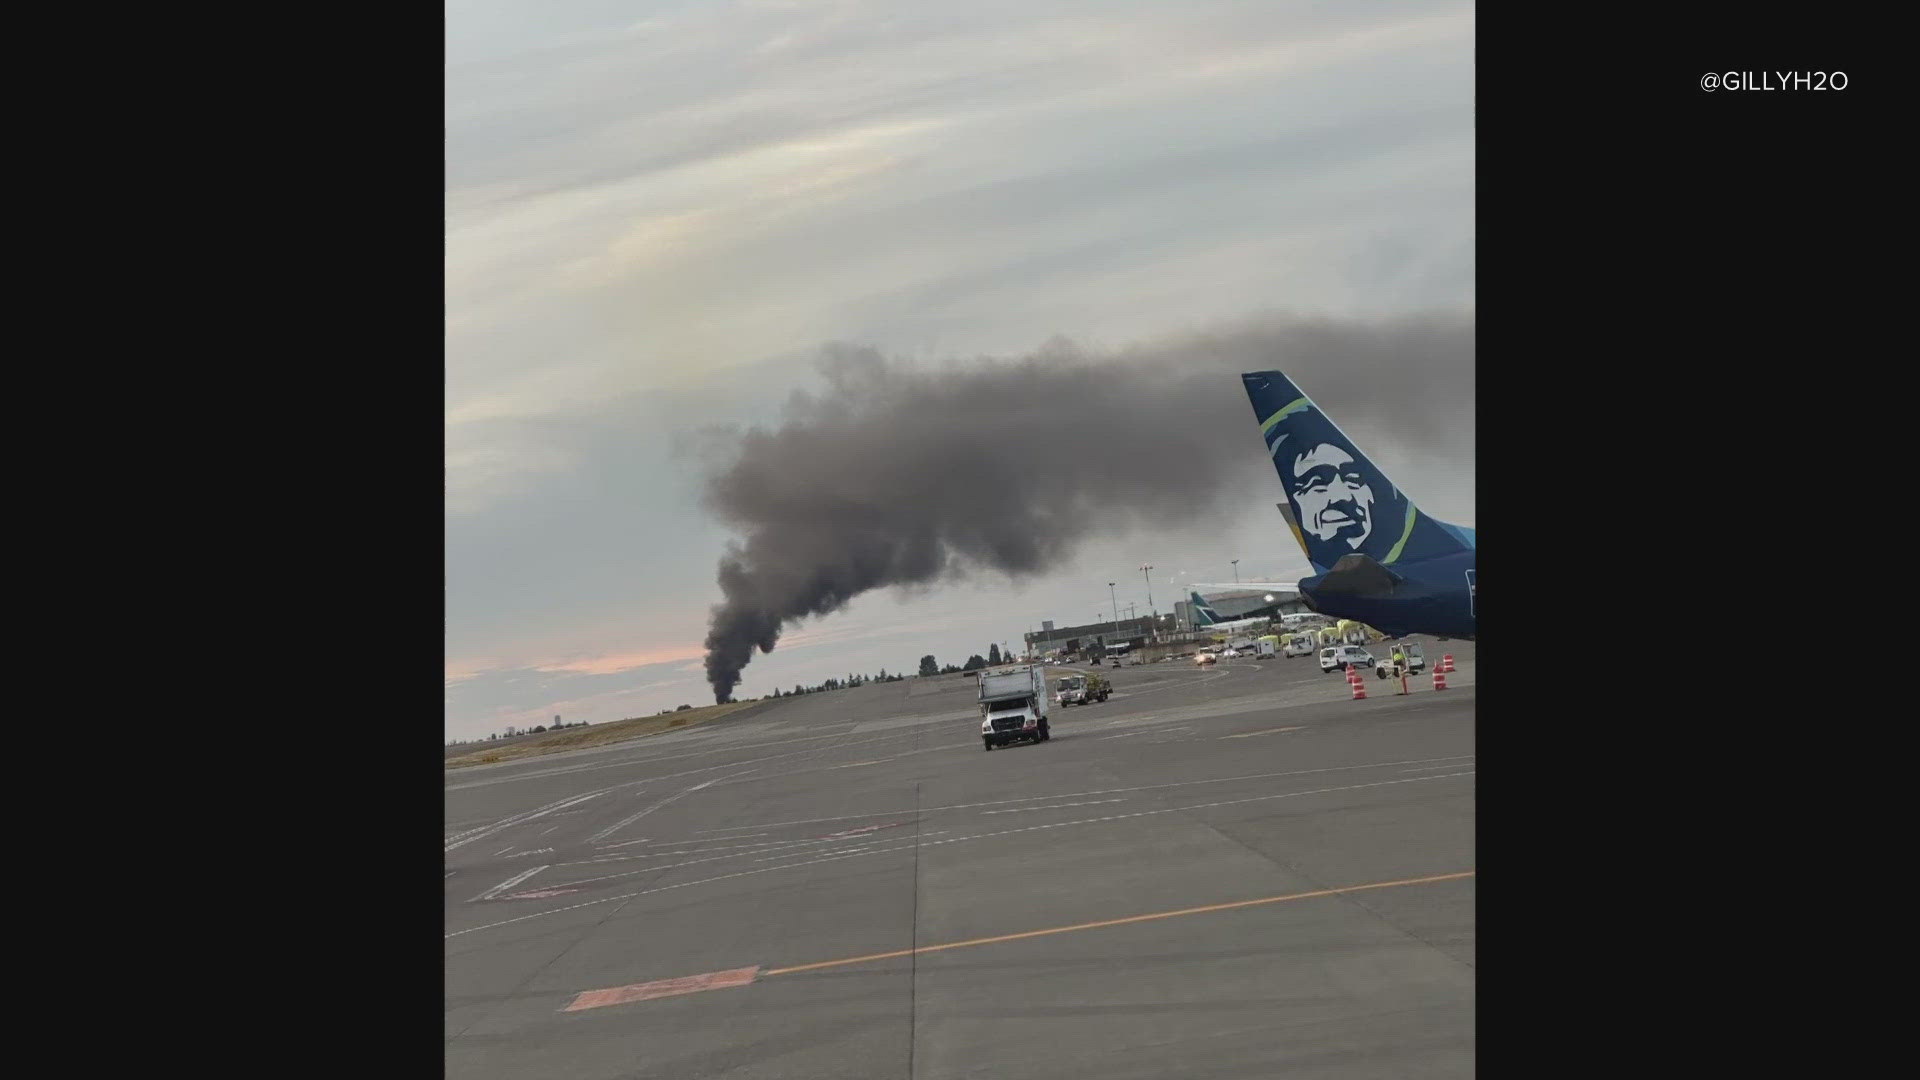 According to an airport spokesperson, the large plume of smoke is not impacting flights.